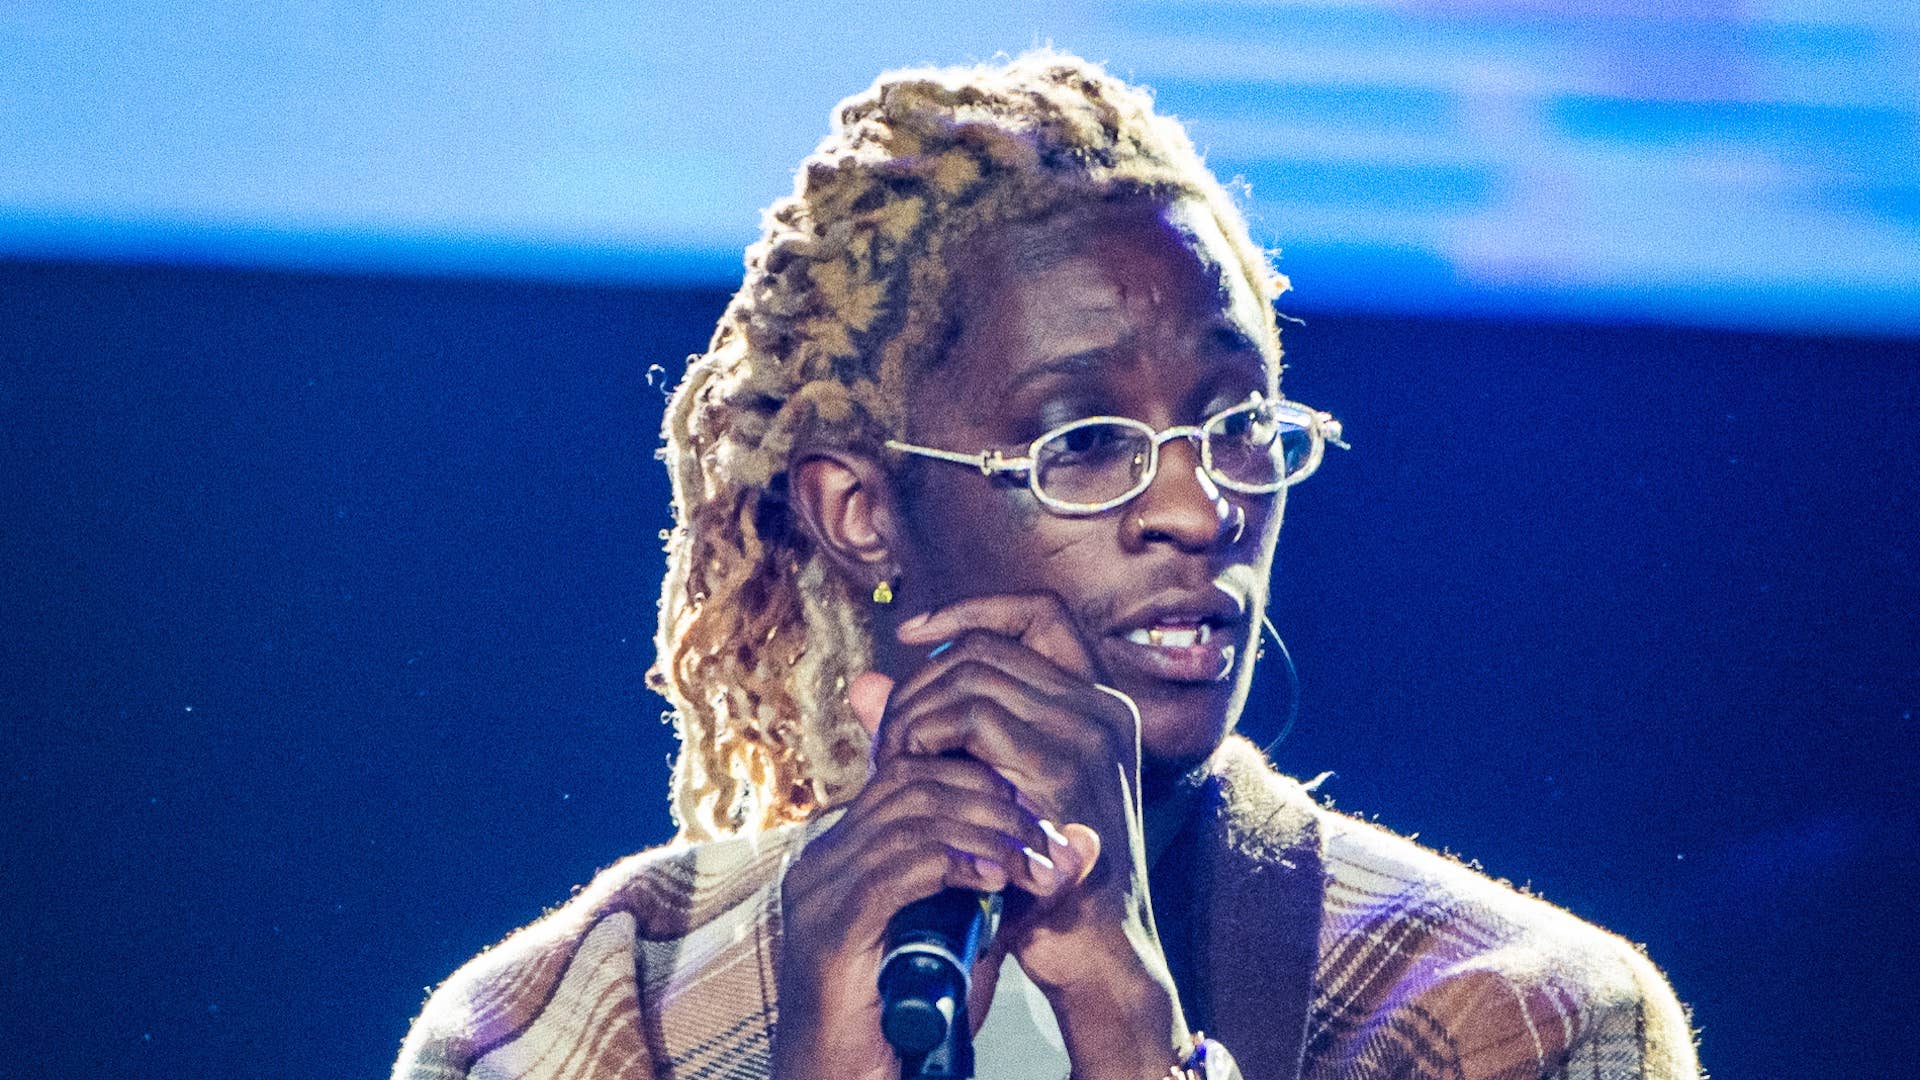 Young Thug performs during Day 1 of Redfestdxb